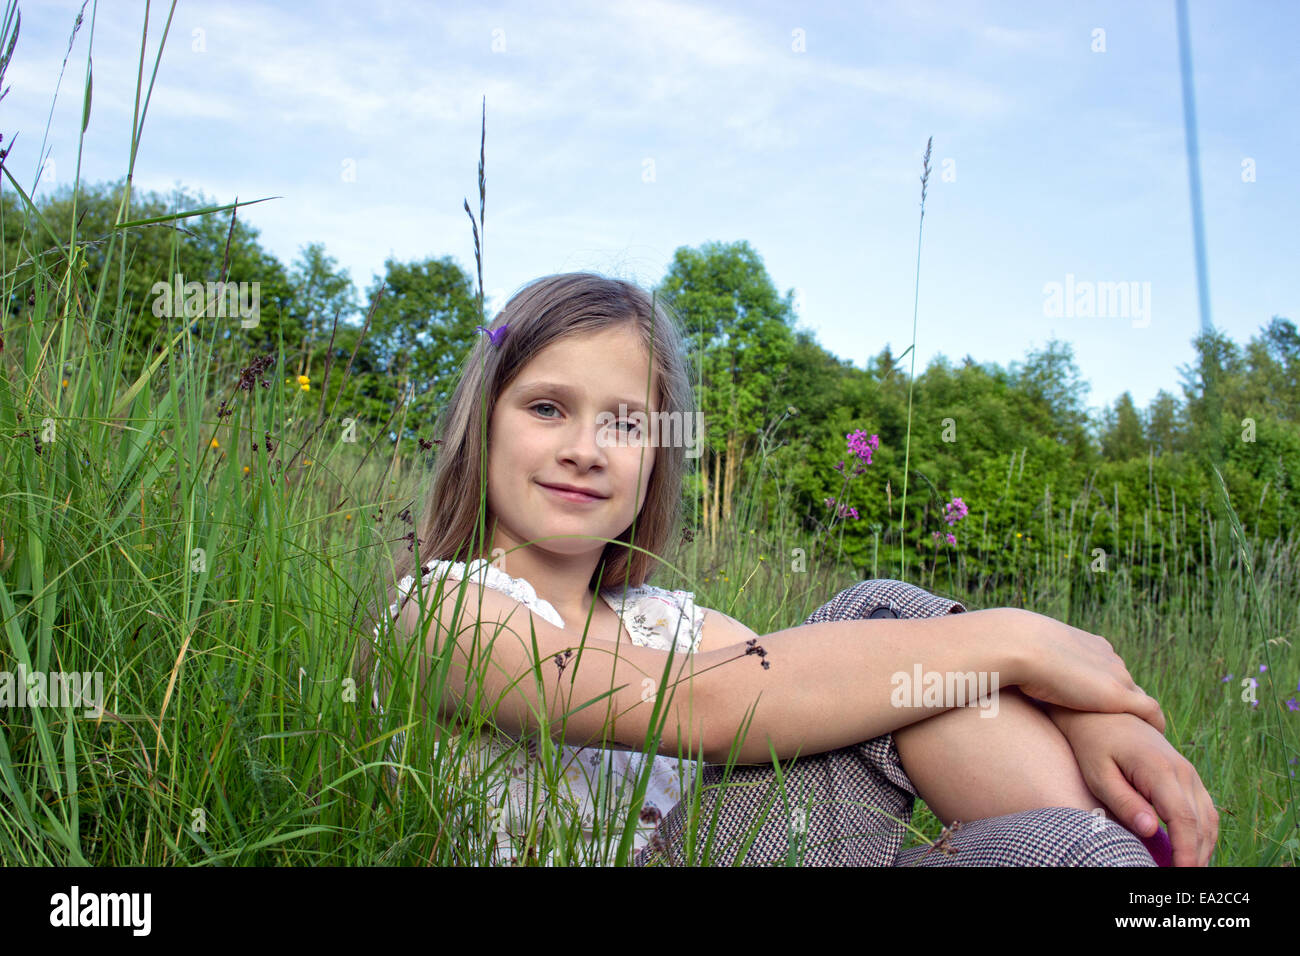 Young, smiling girl in a meadow Stock Photo